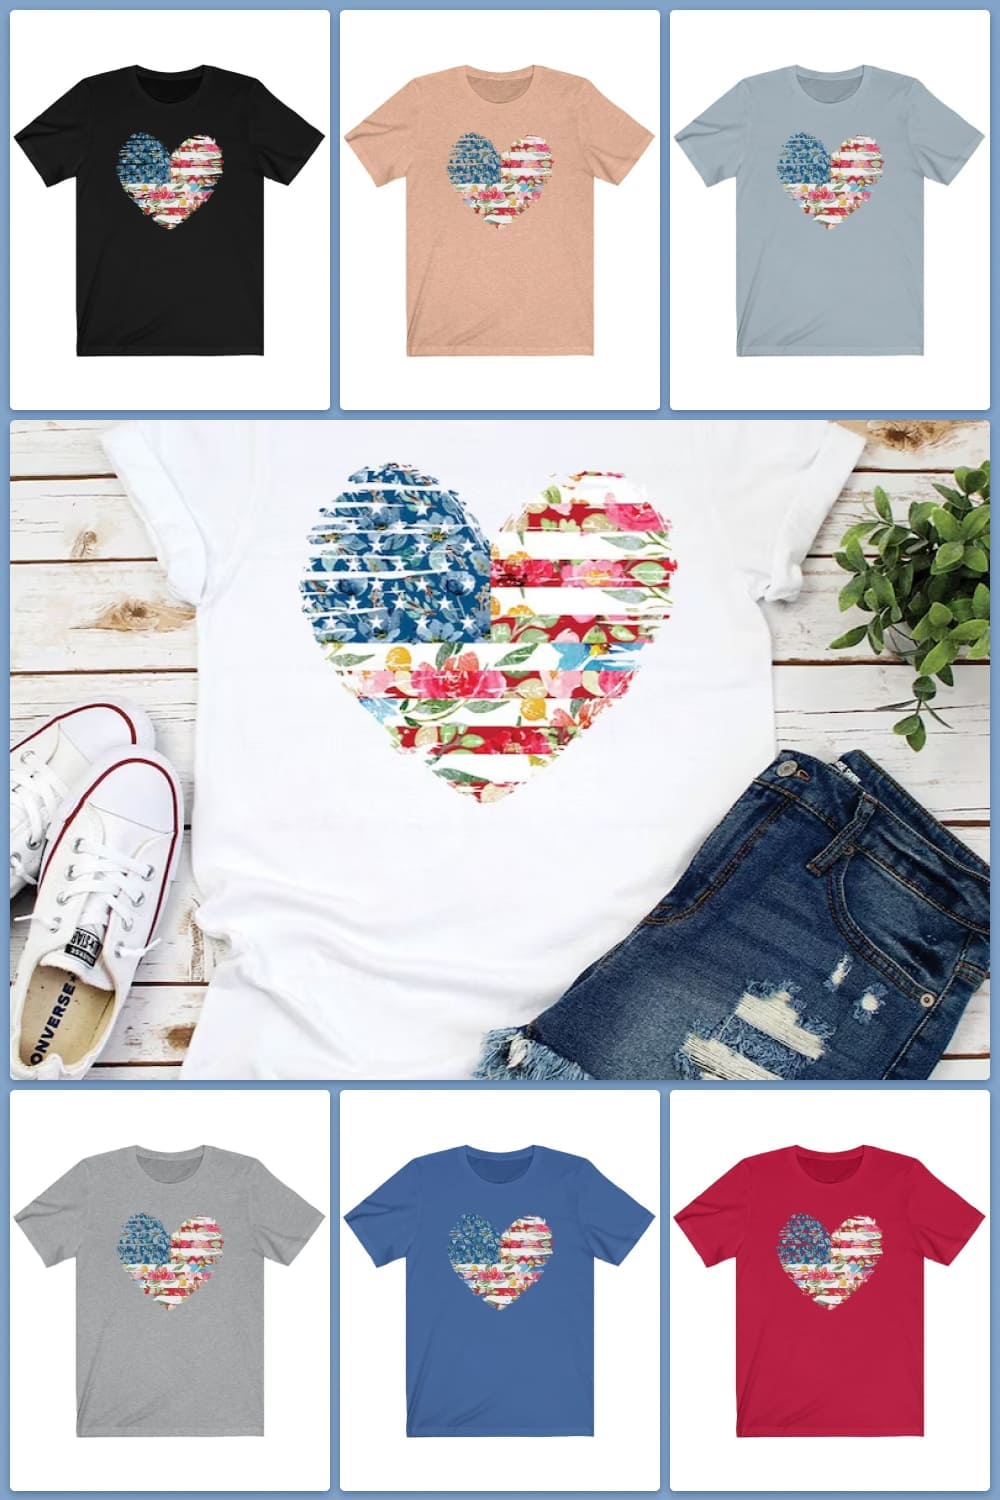 Collage of colorful t-shirts with the US flag in the form of a heart.